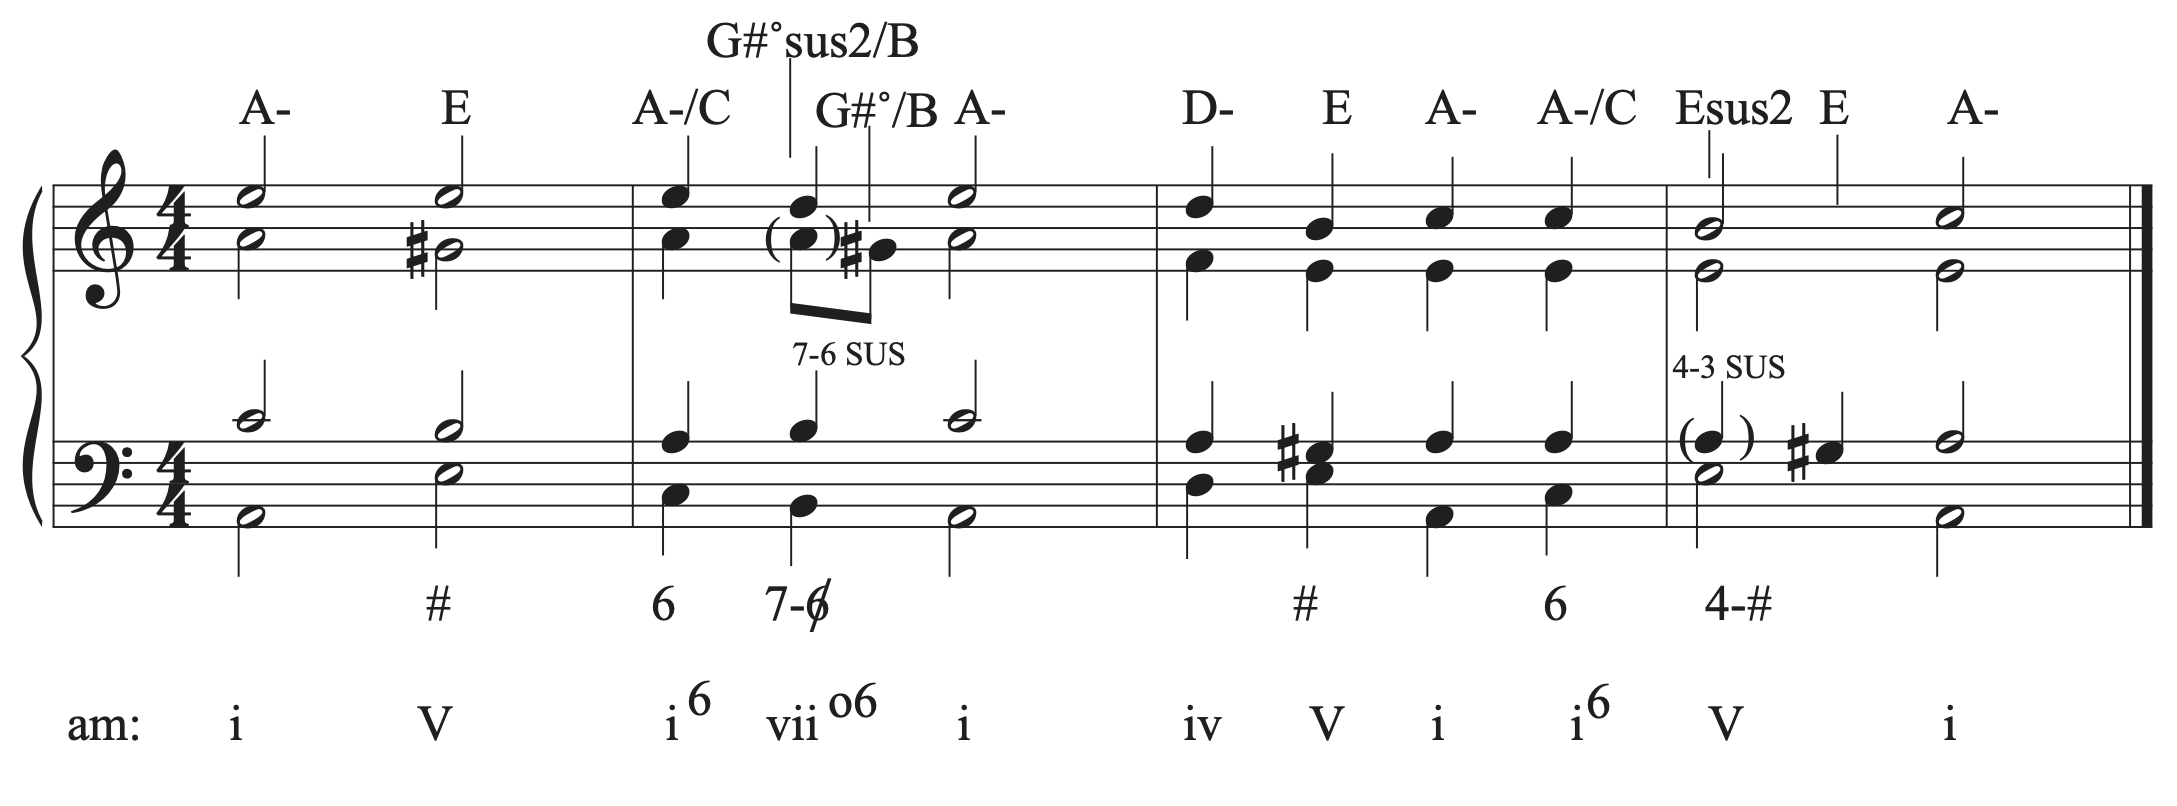 The musical example in A minor with a 4-3 suspension added.